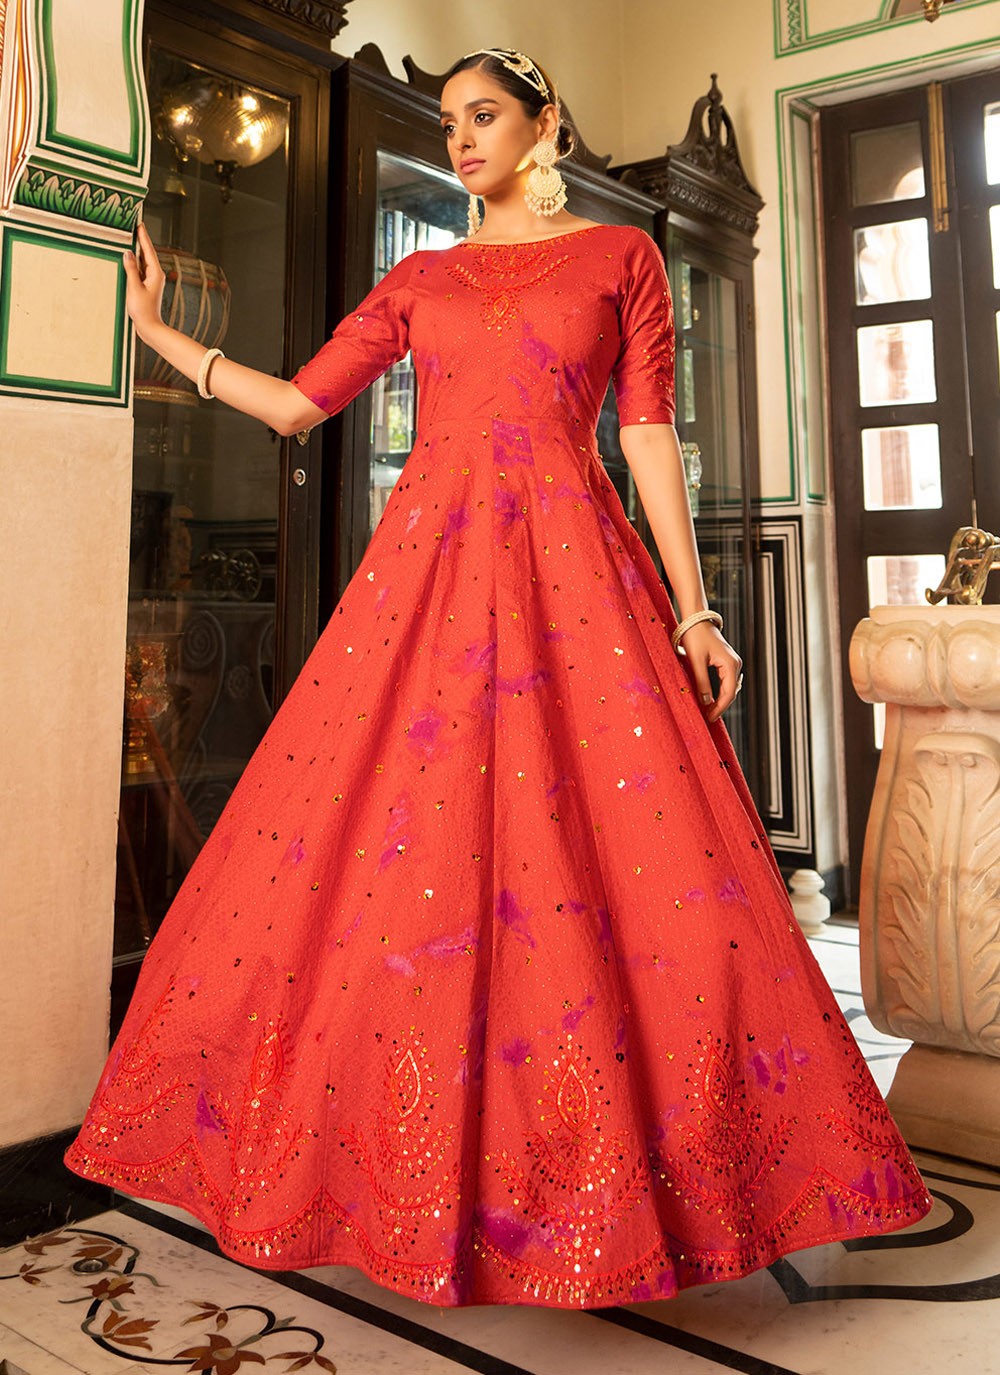 Cotton Embroidered Orange Floor Length Gown